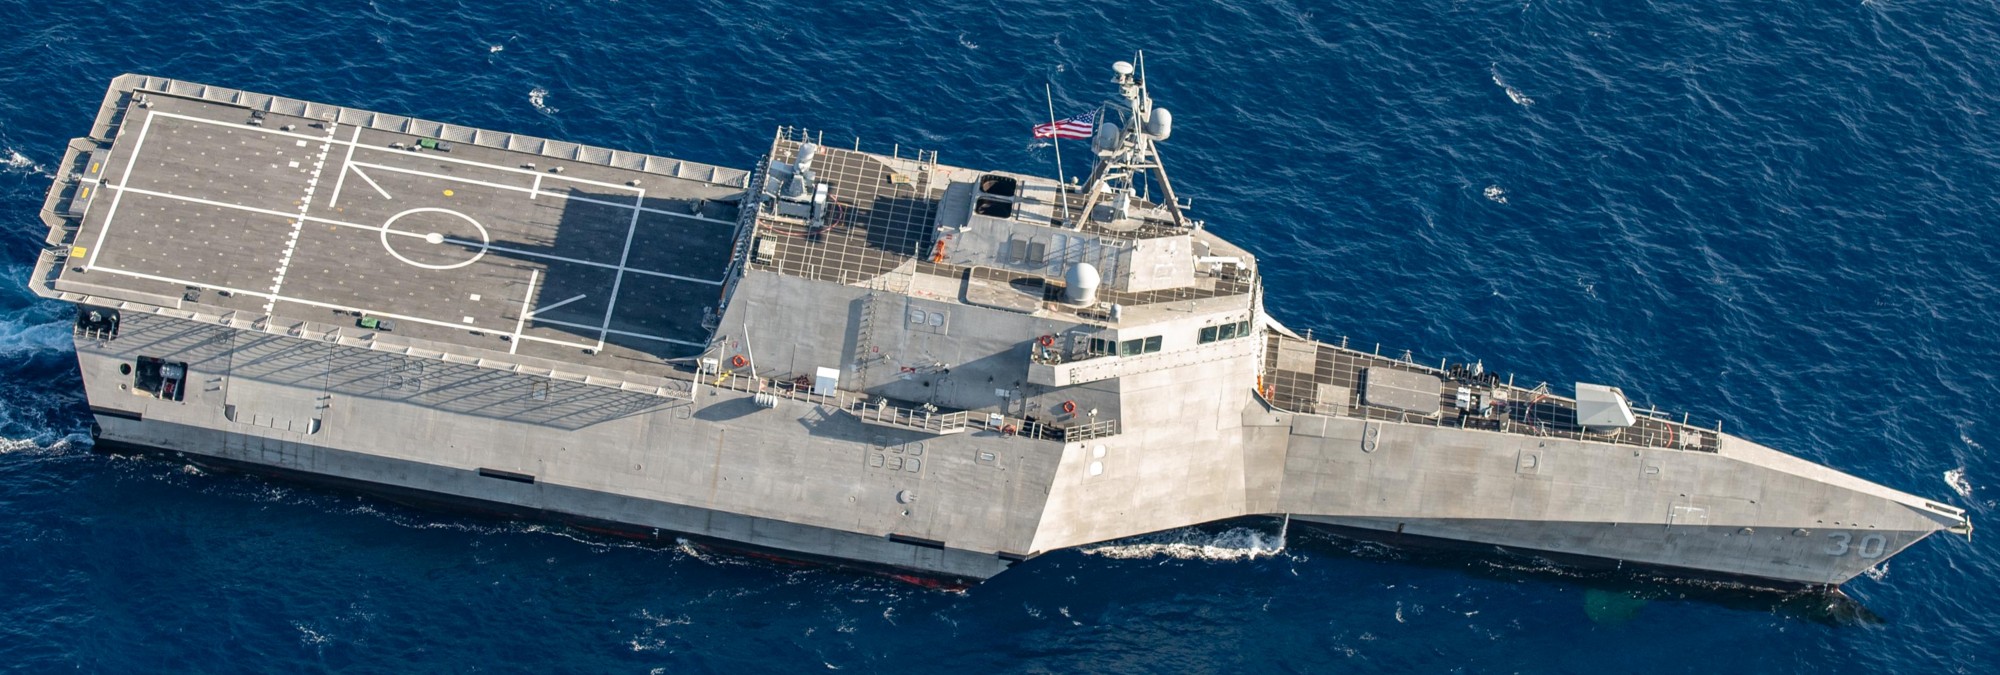 lcs-30 uss canberra littoral combat ship independence class us navy 26